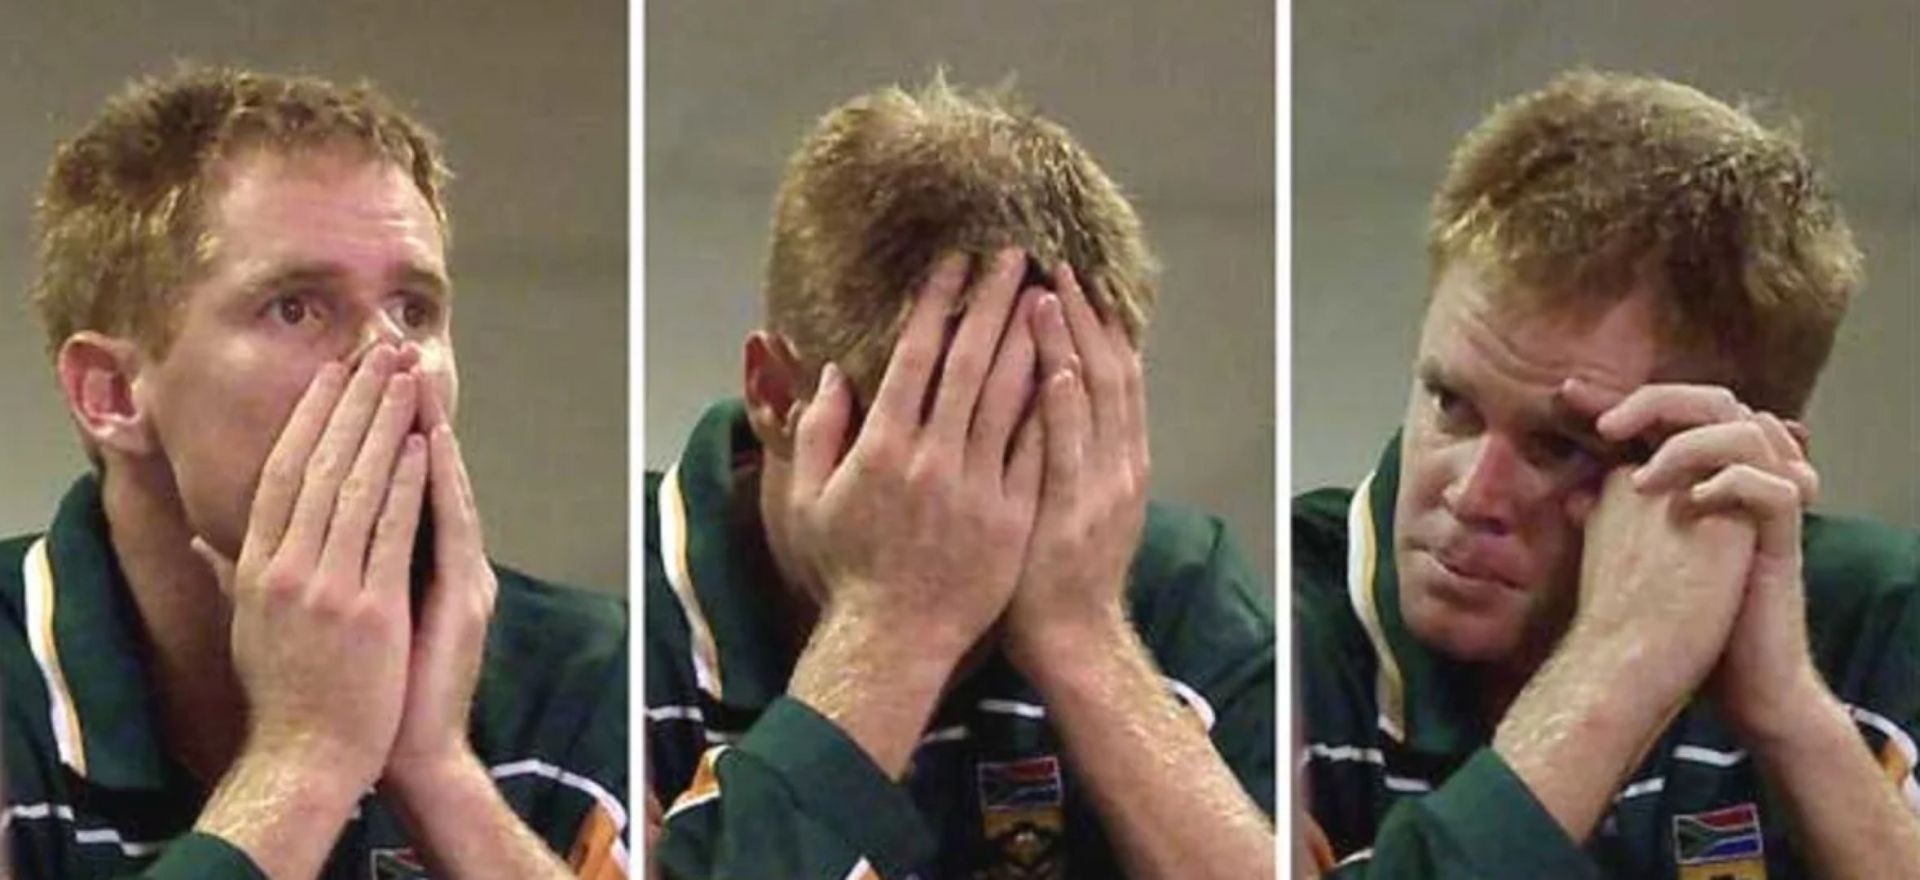 Shaun Pollock captained South Africa in their disastrous home World Cup campaign in 2003.